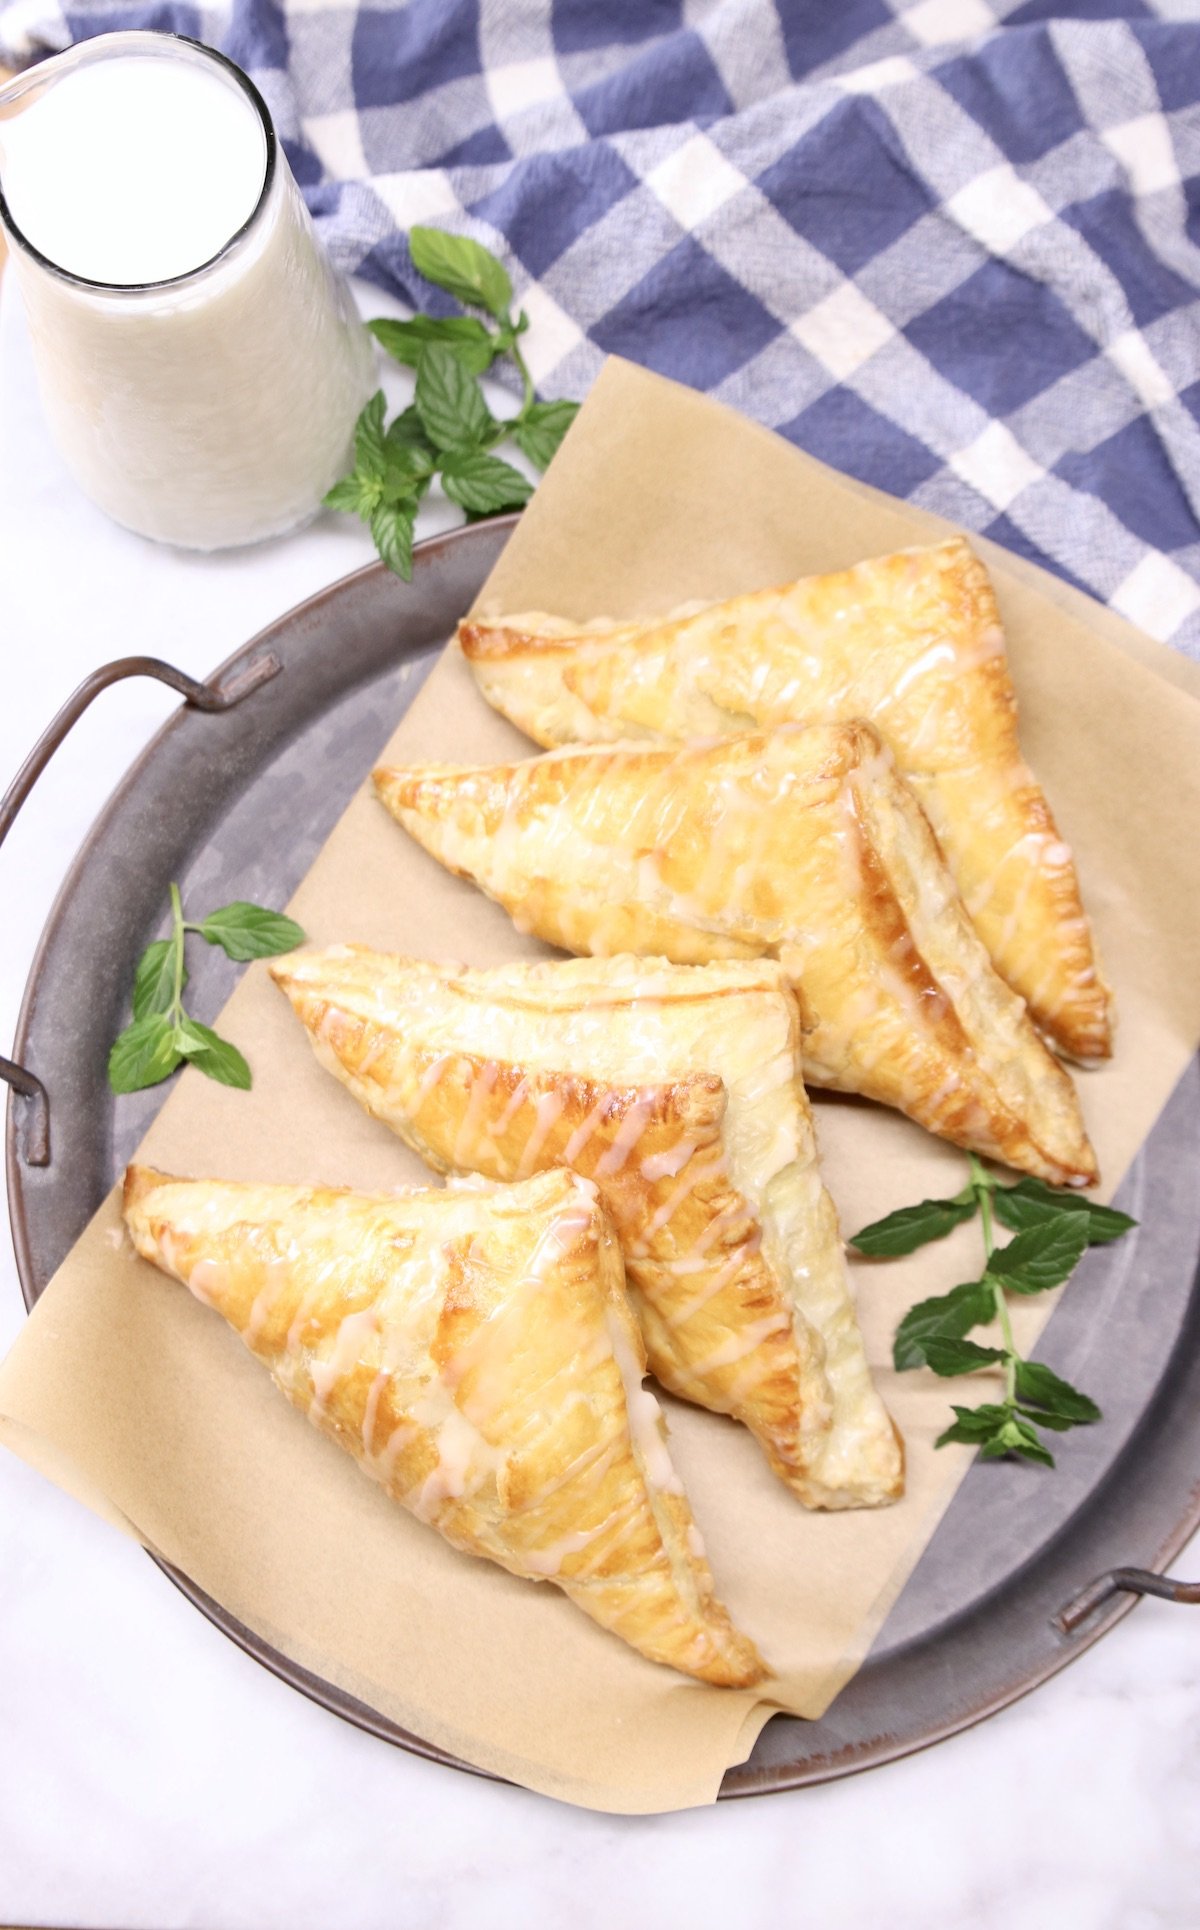 platter of apple turnovers with pitcher of milk, blue napkin